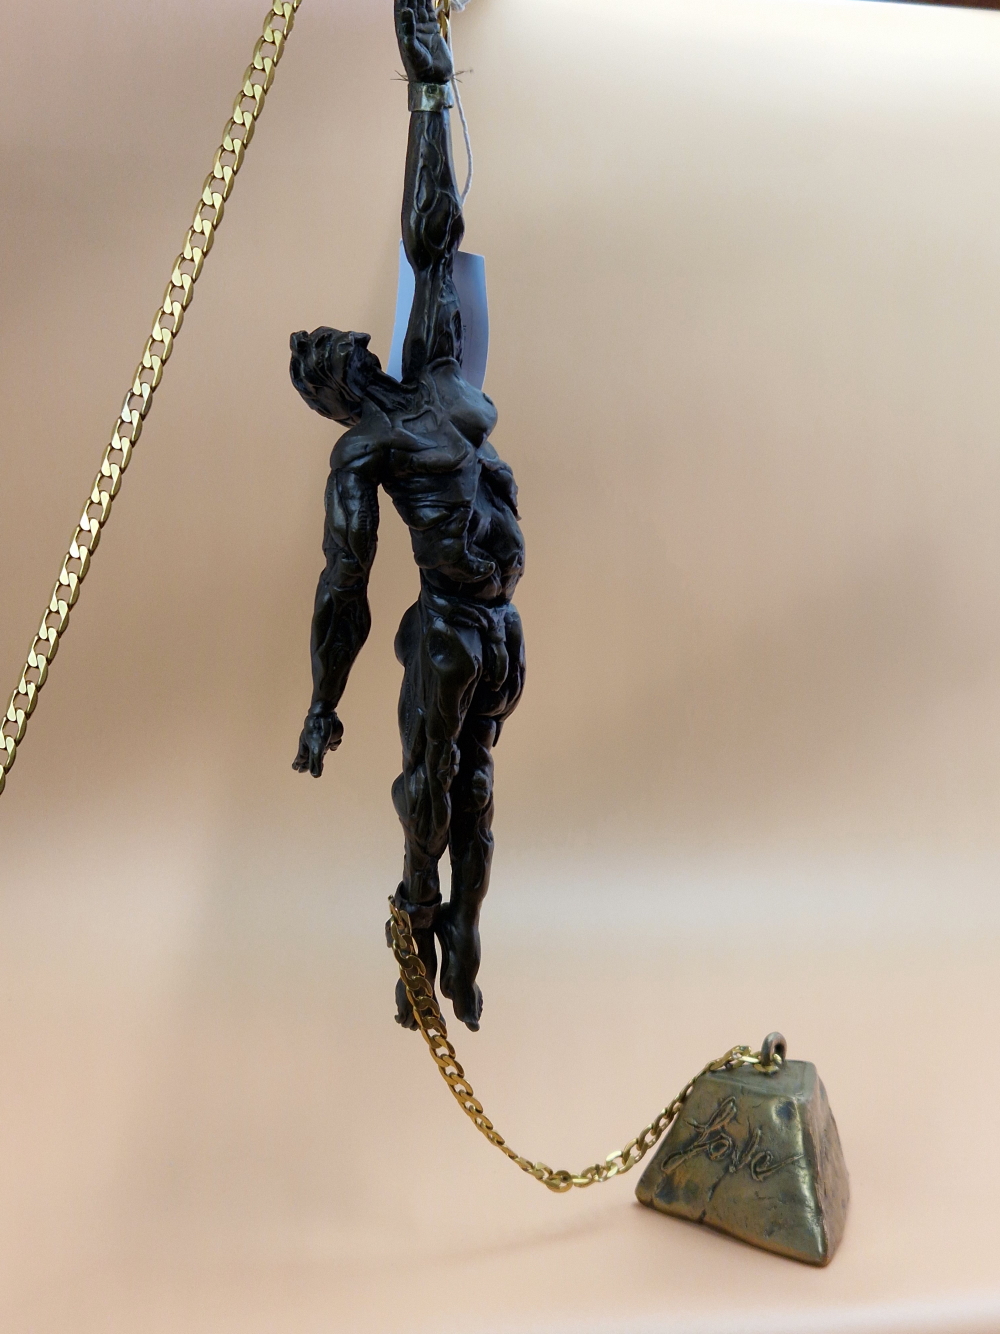 FELIPE GONZALEZ, A CONTEMPORARY BRONZE FIGURE OF A NAKED DIVER, A MANACLE ON HIS LEFT WRIST